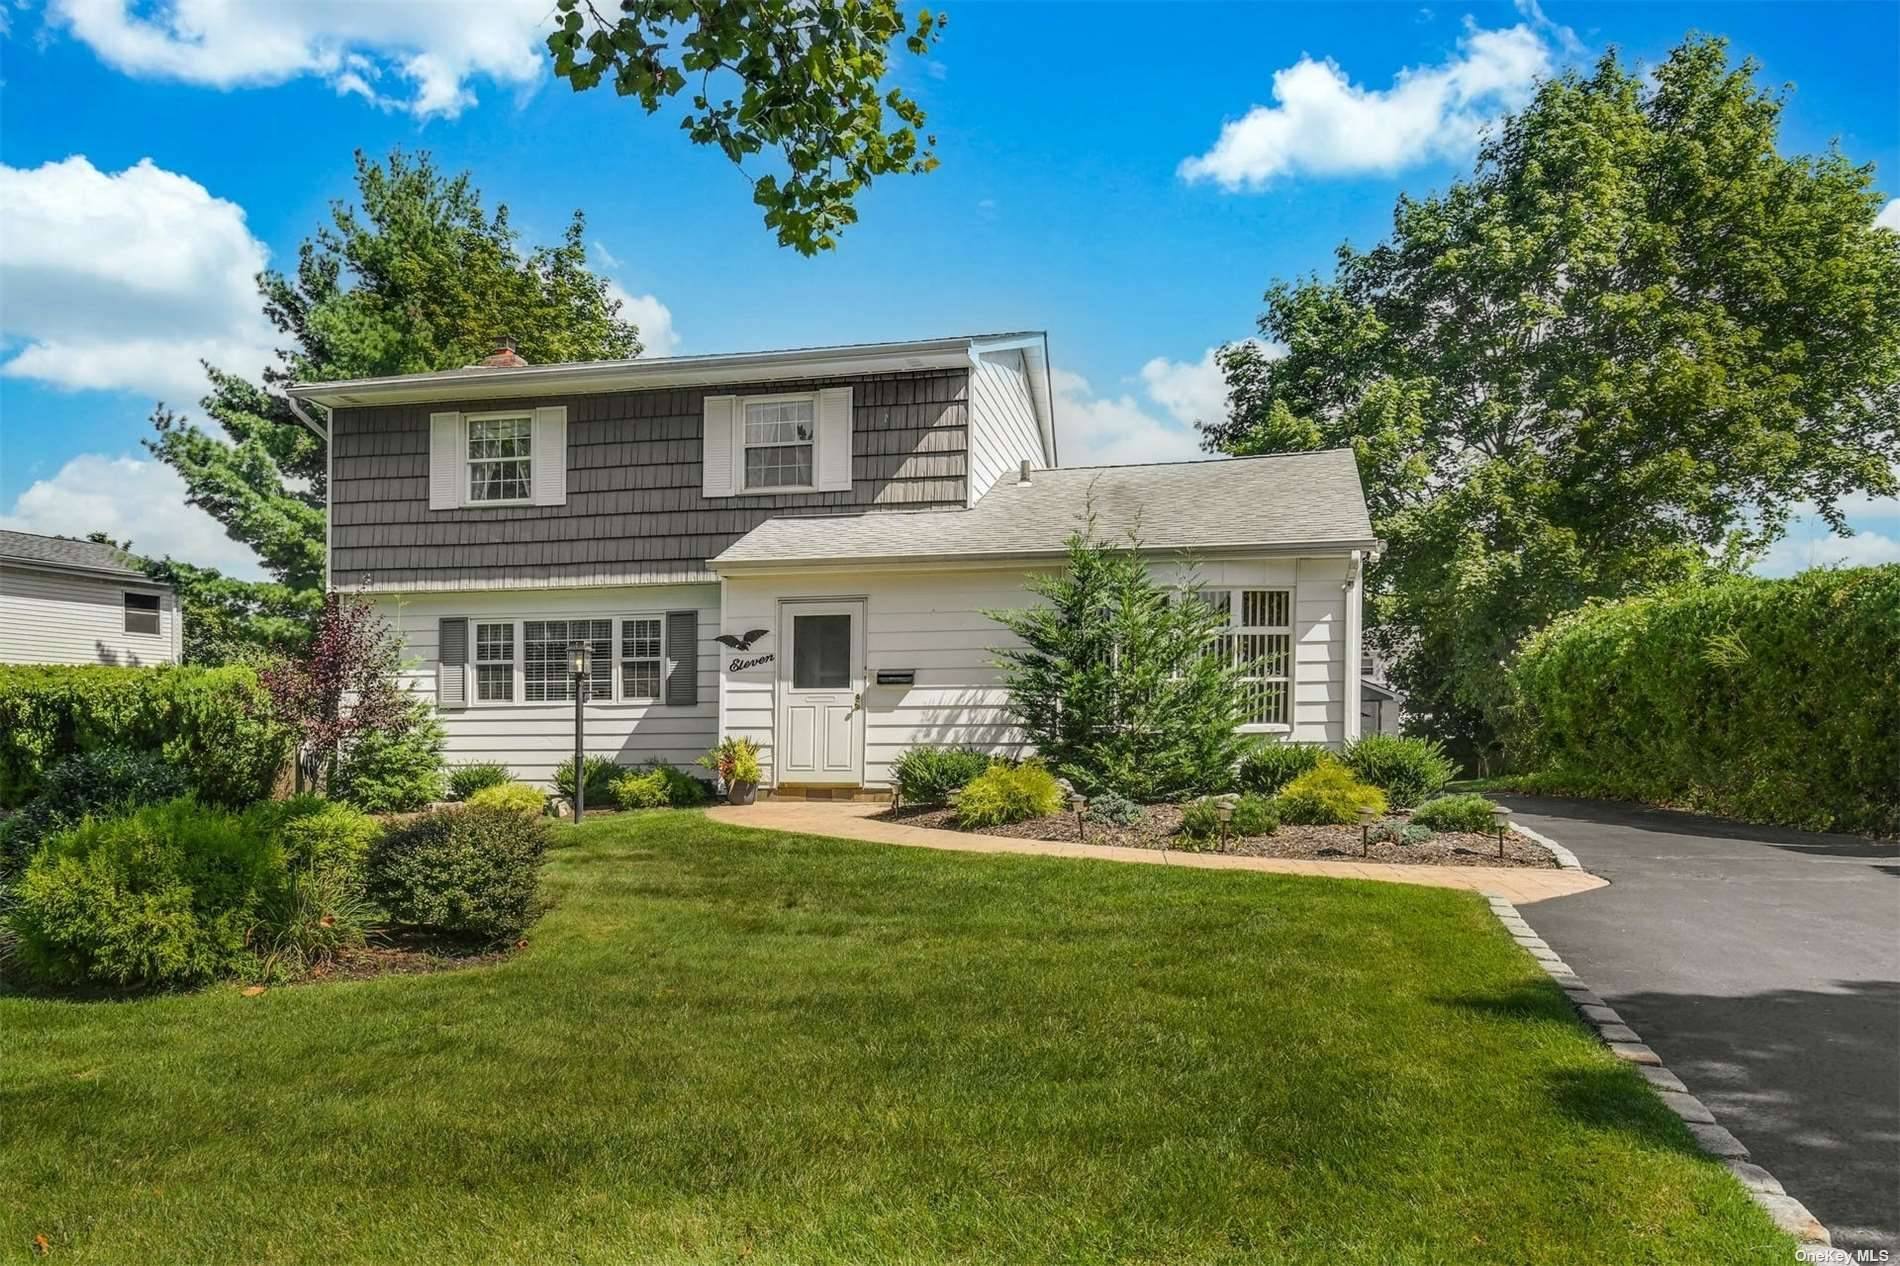 Lovely 4 Bedroom 1. 5 Bath colonial located on a quiet tree lined sidewalk street.